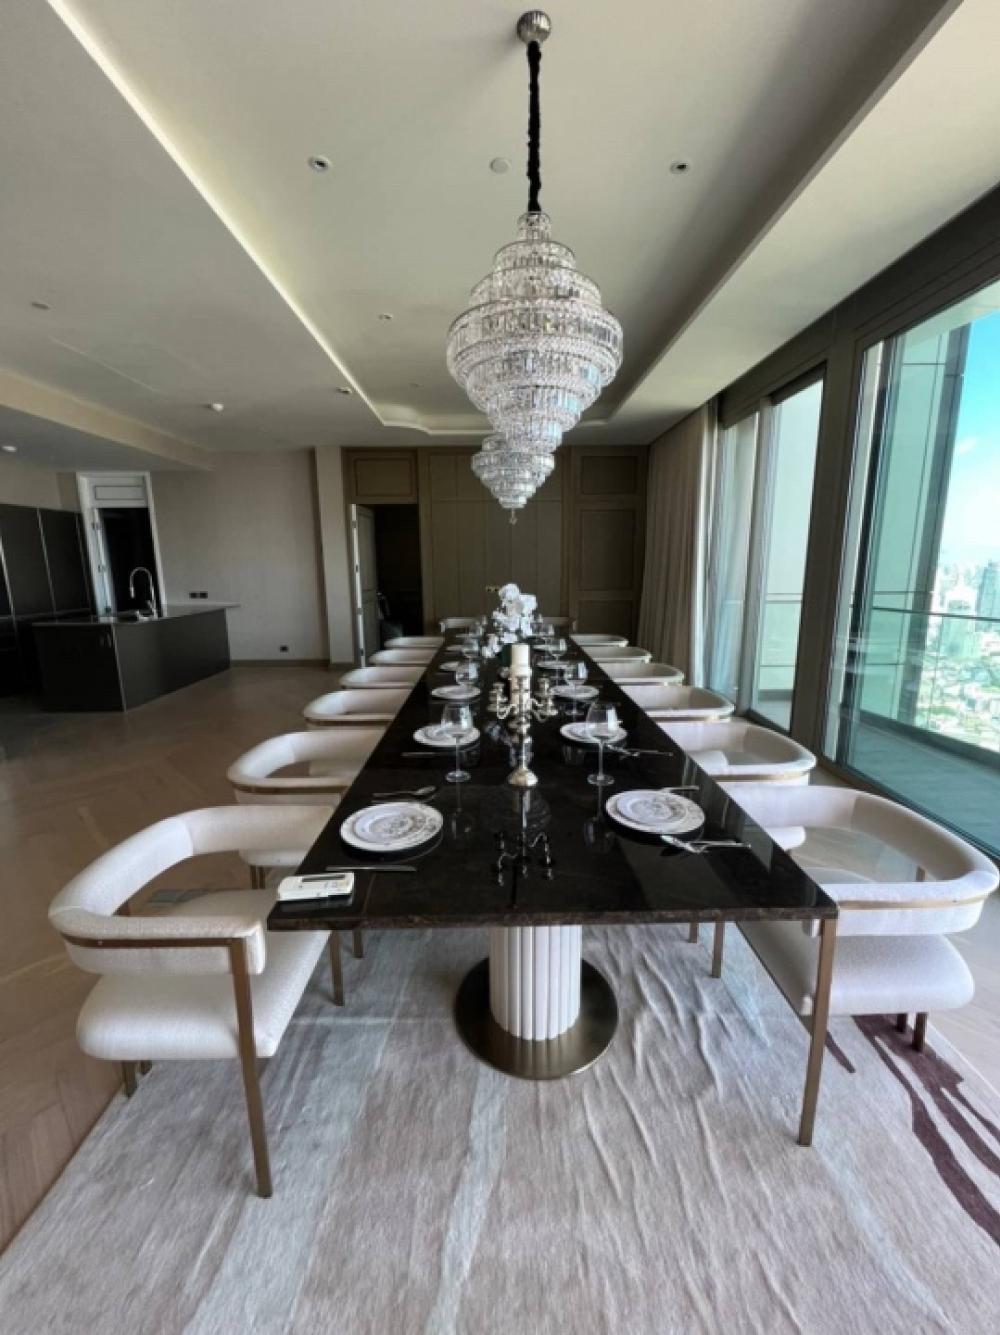 For RentCondoWongwianyai, Charoennakor : SELLING  / RENTAL : PENHOUSE at The Residence Mandarin Oriental Luxurious Fully Furnished •6 bedroom 9 bathroom with maid quater•2 Western Kitchens and 2 Thai kitchens•3 Sperated Private lifts lobby (Total 6 lifts for residents and 1 for maid) direct